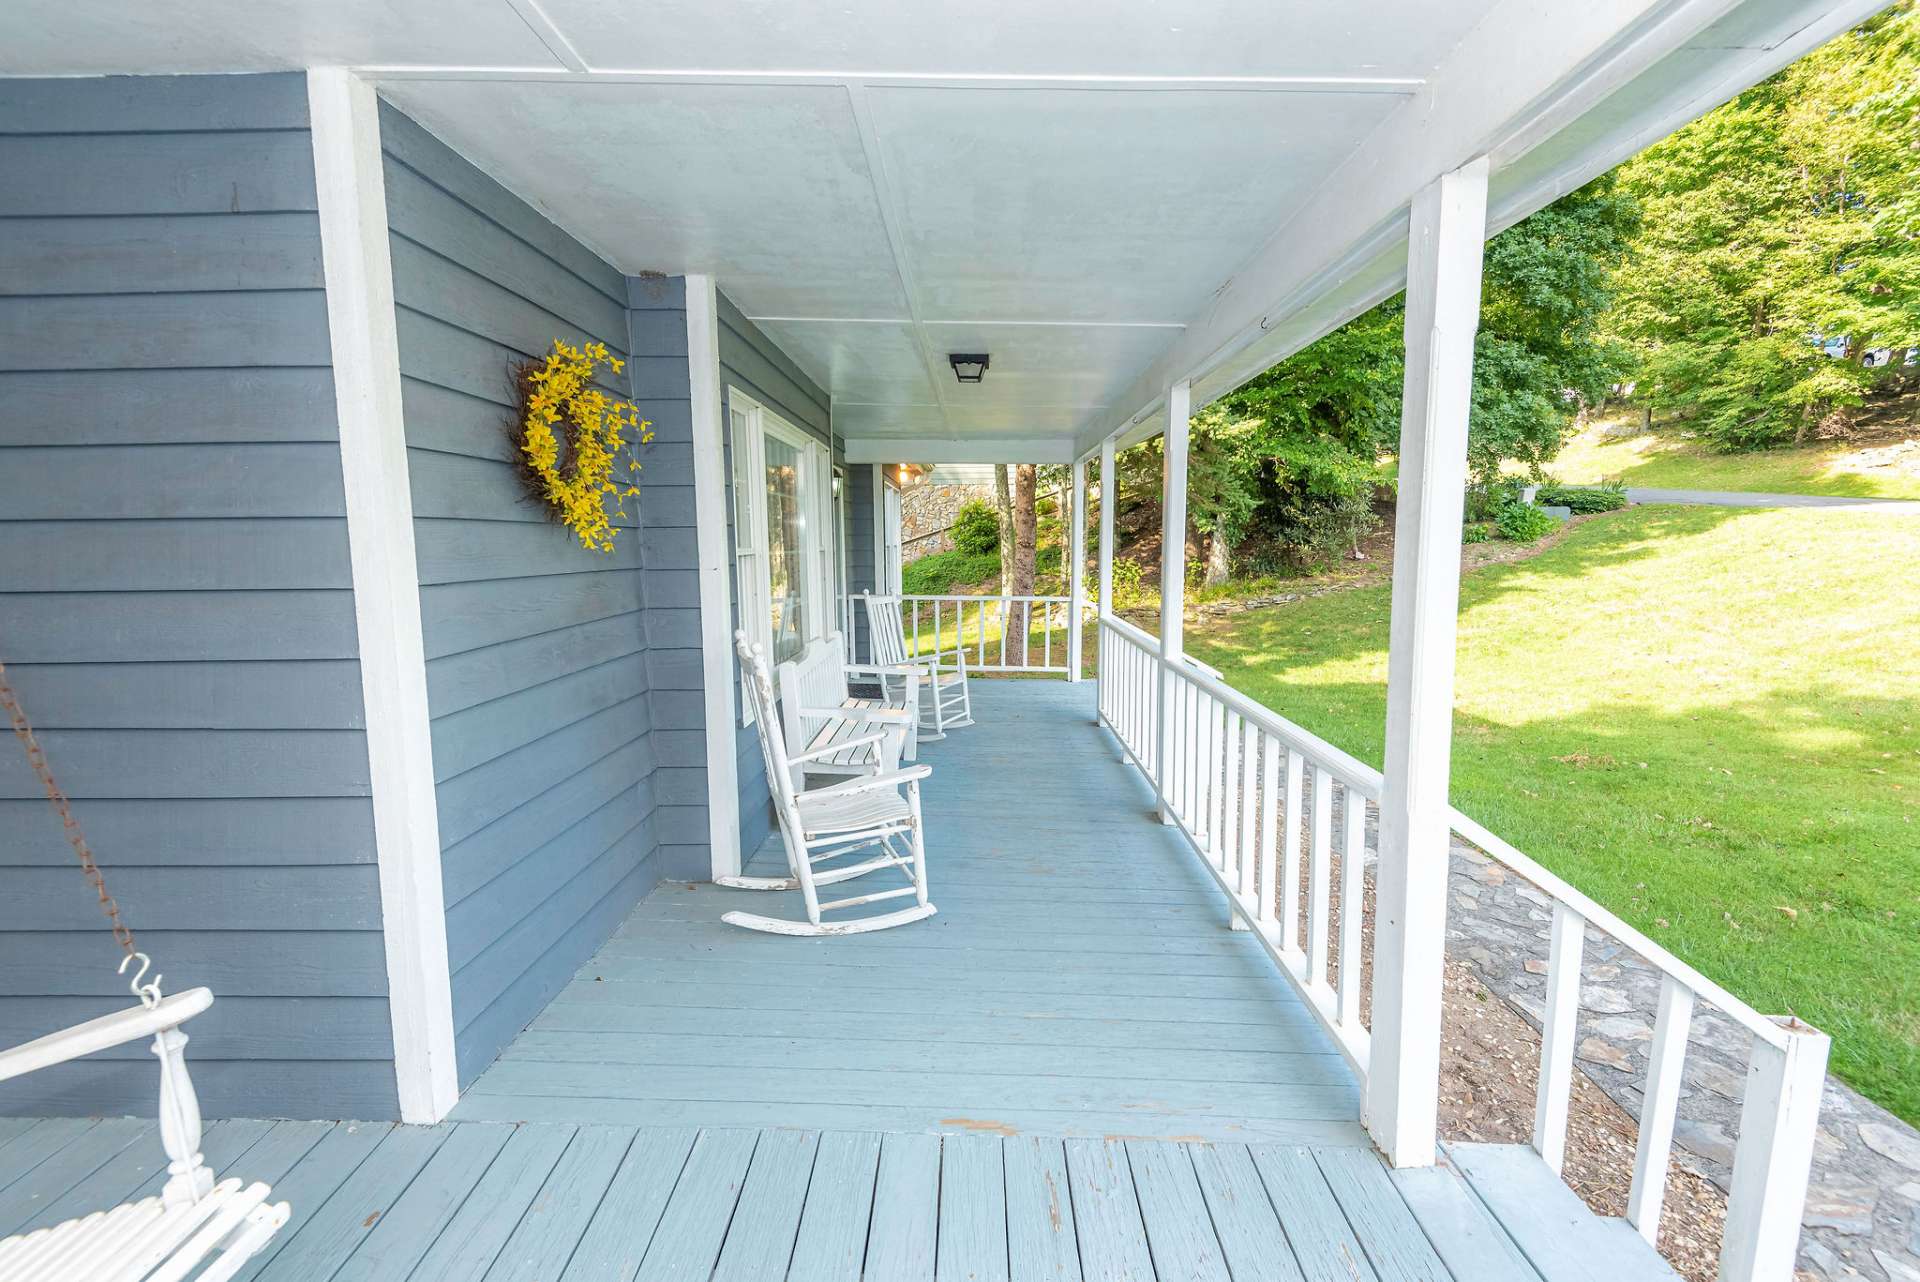 The covered wrap porch provides plenty of space for outdoor entertaining.